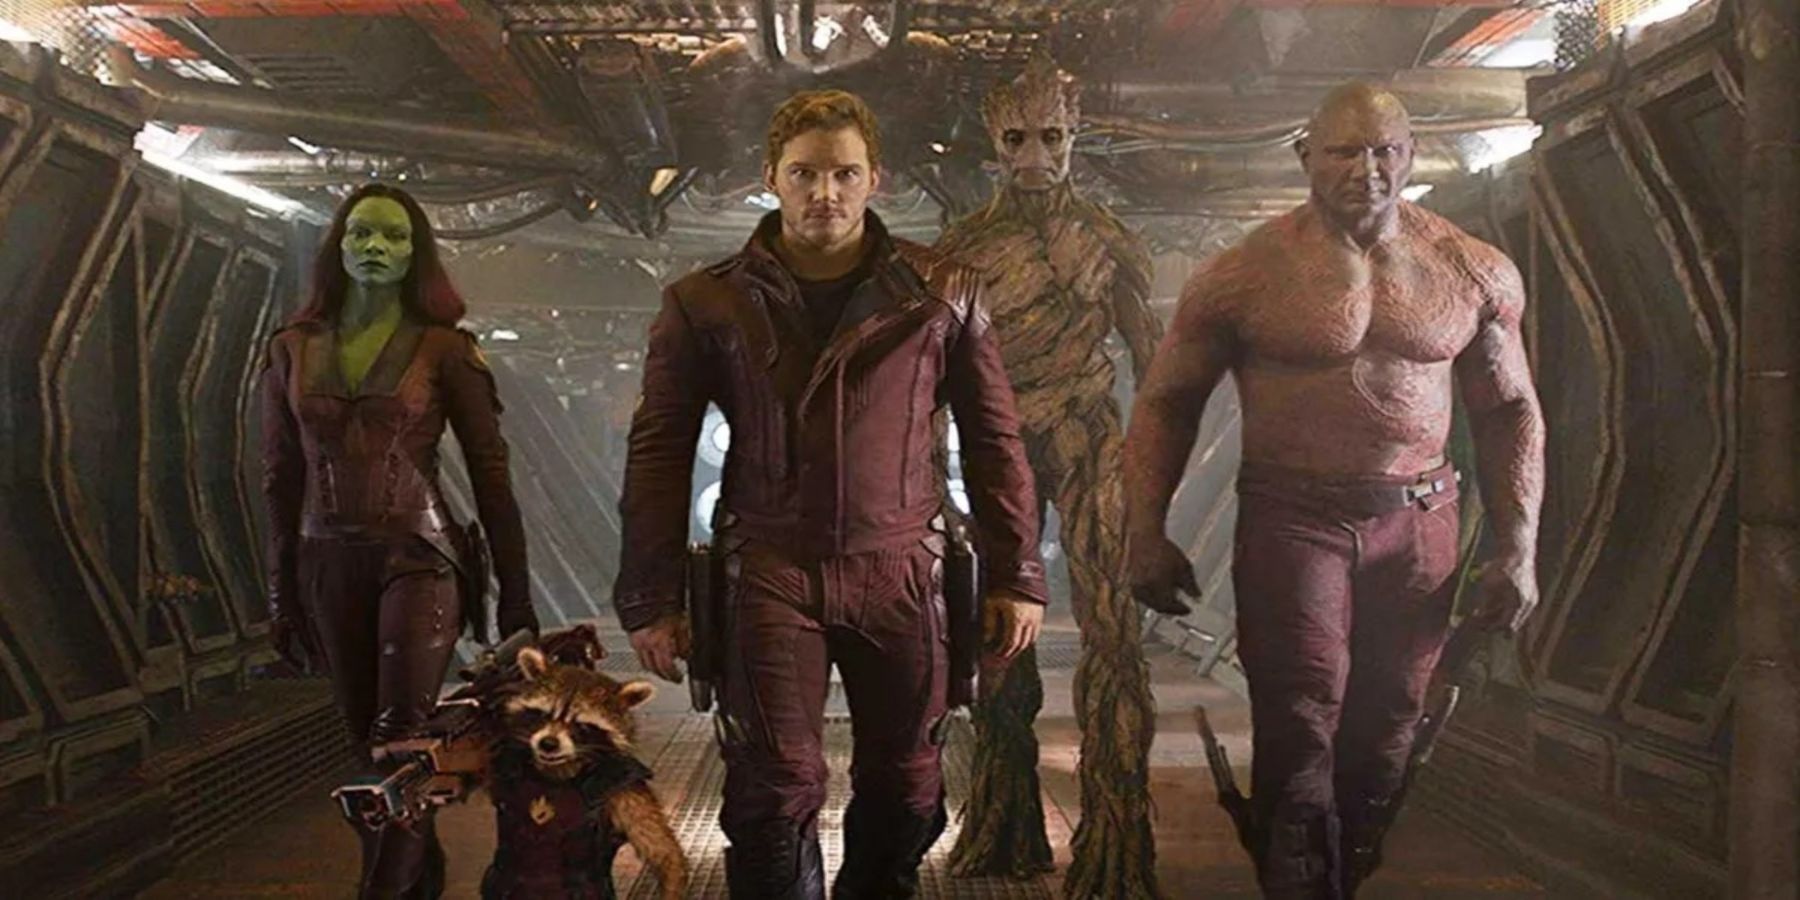 Guardians of the galaxy group shot